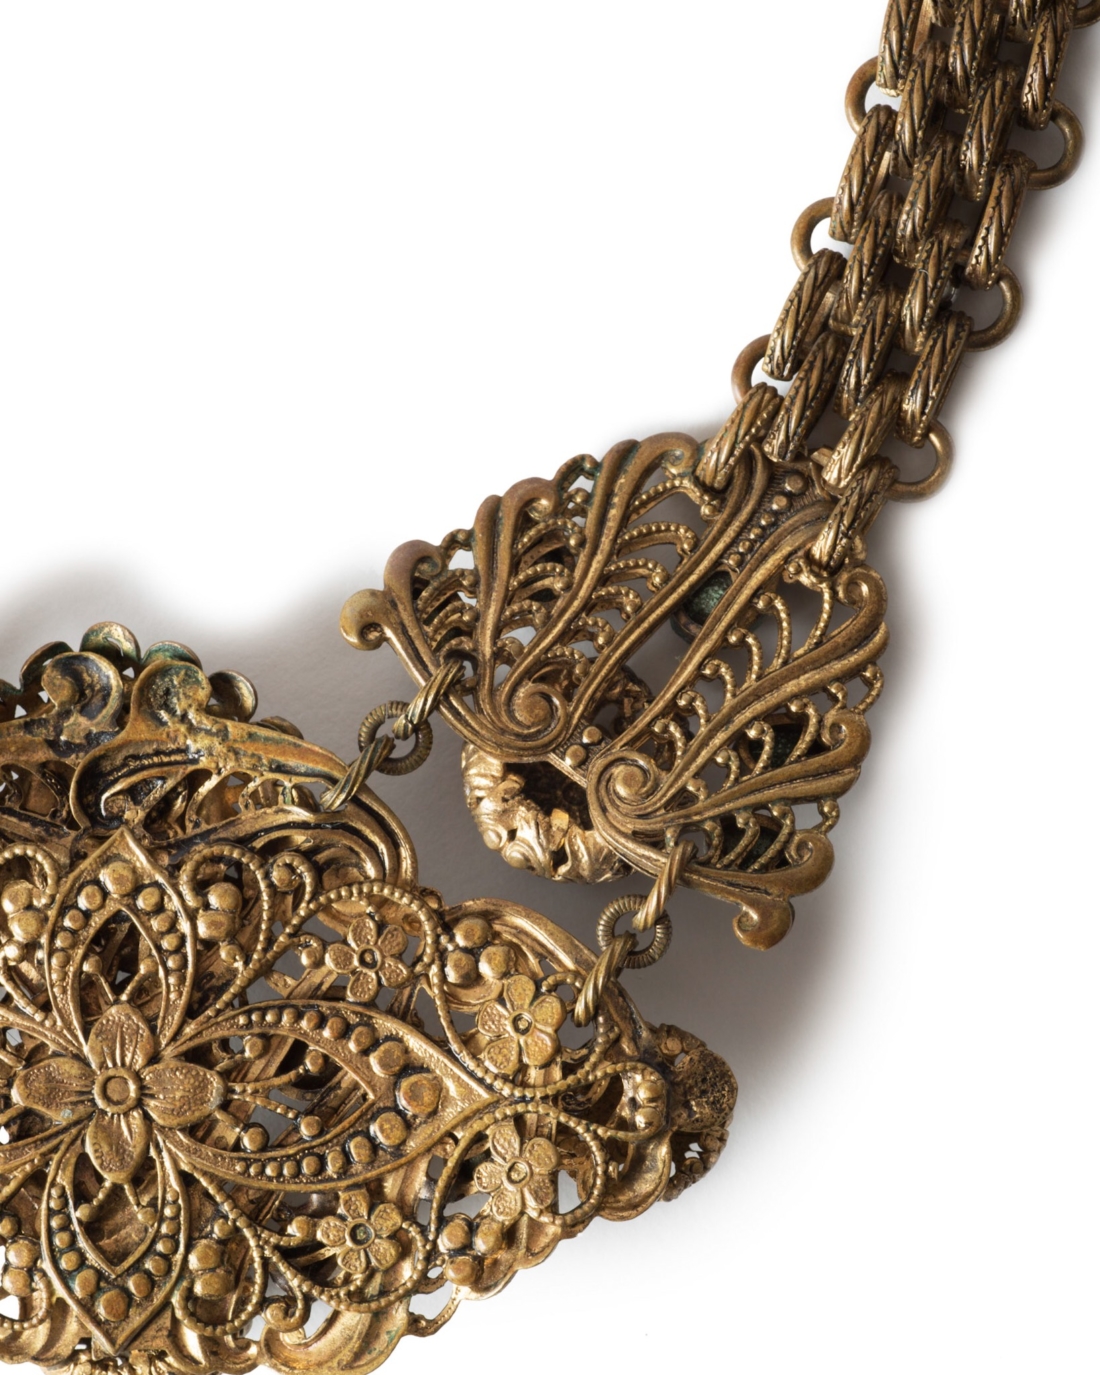 Exquisite Austro-Hungarian Enameled Necklace on Gingerbread Chain, circa 1930's